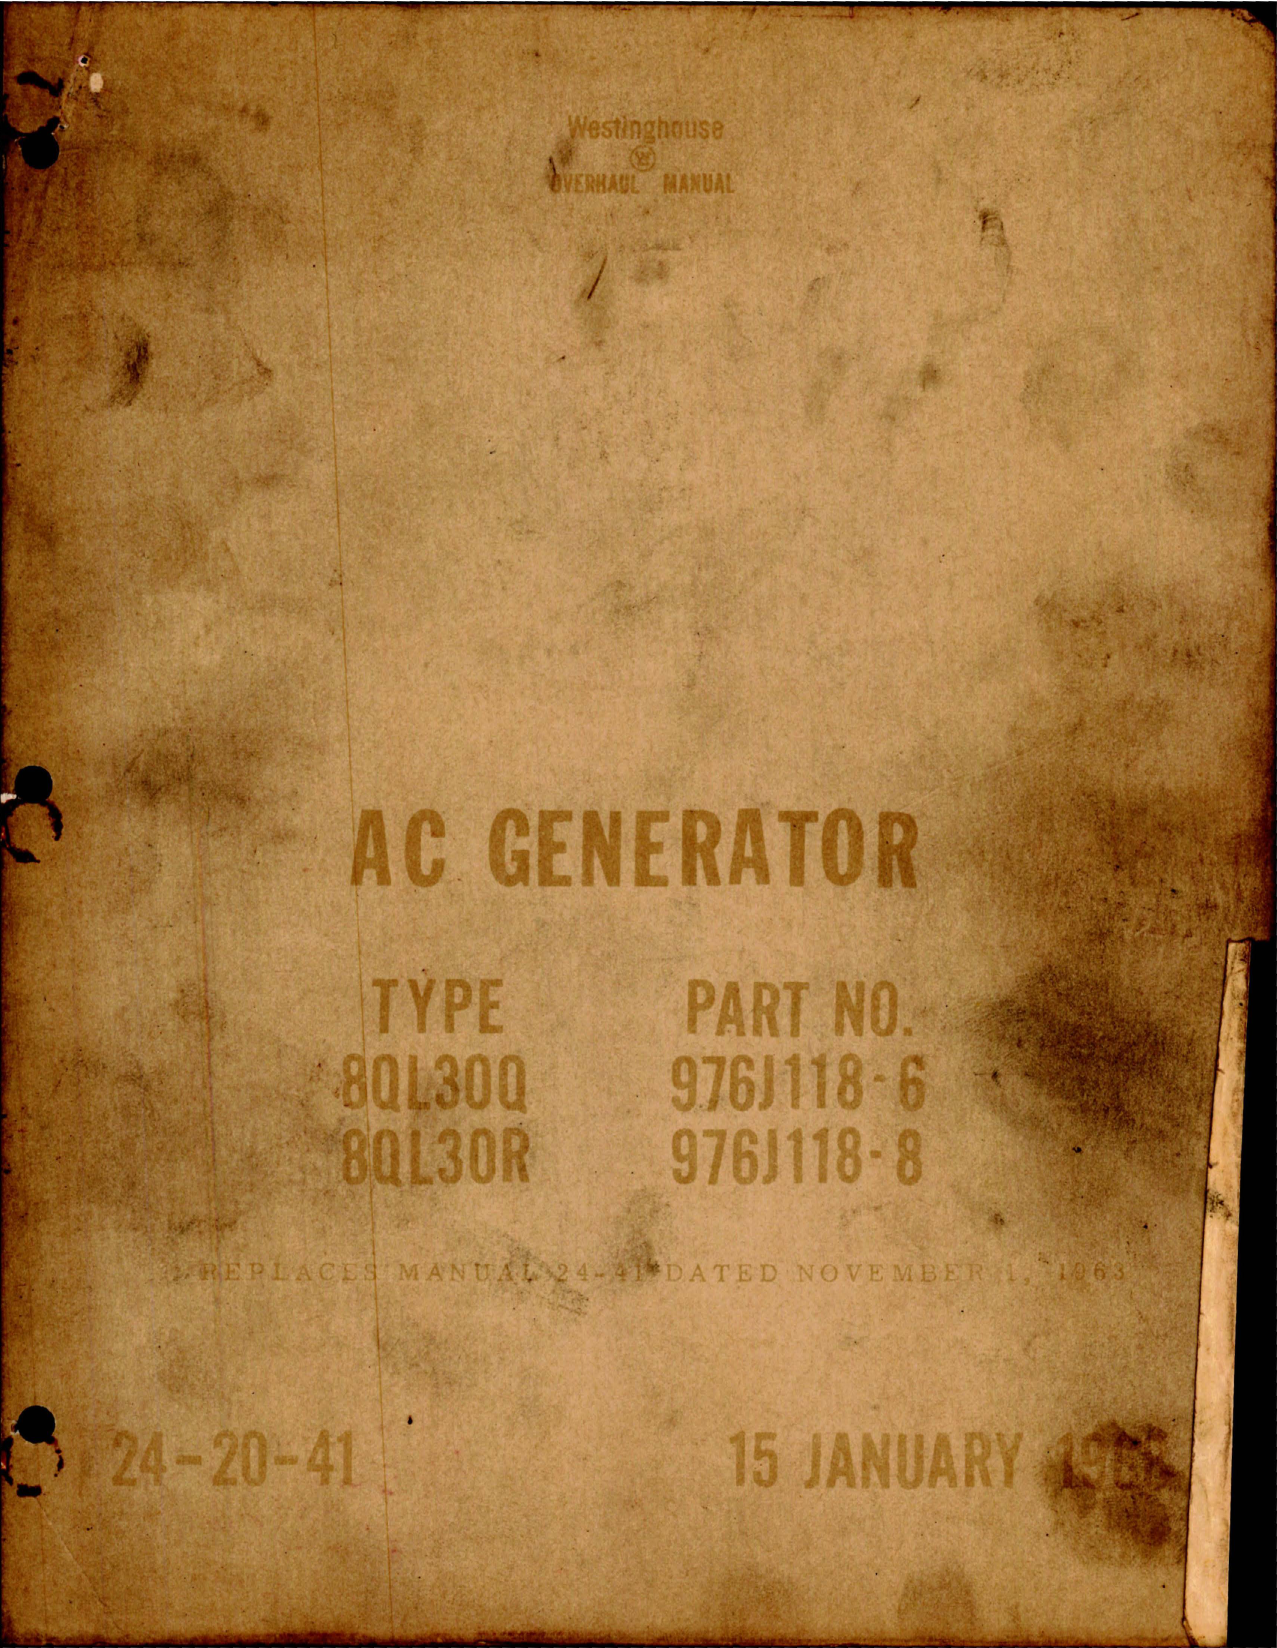 Sample page 1 from AirCorps Library document: Overhaul Manual for AC Generator - Types 8QL30Q and 8QL30R - Parts 976J118-6, 976J118-8